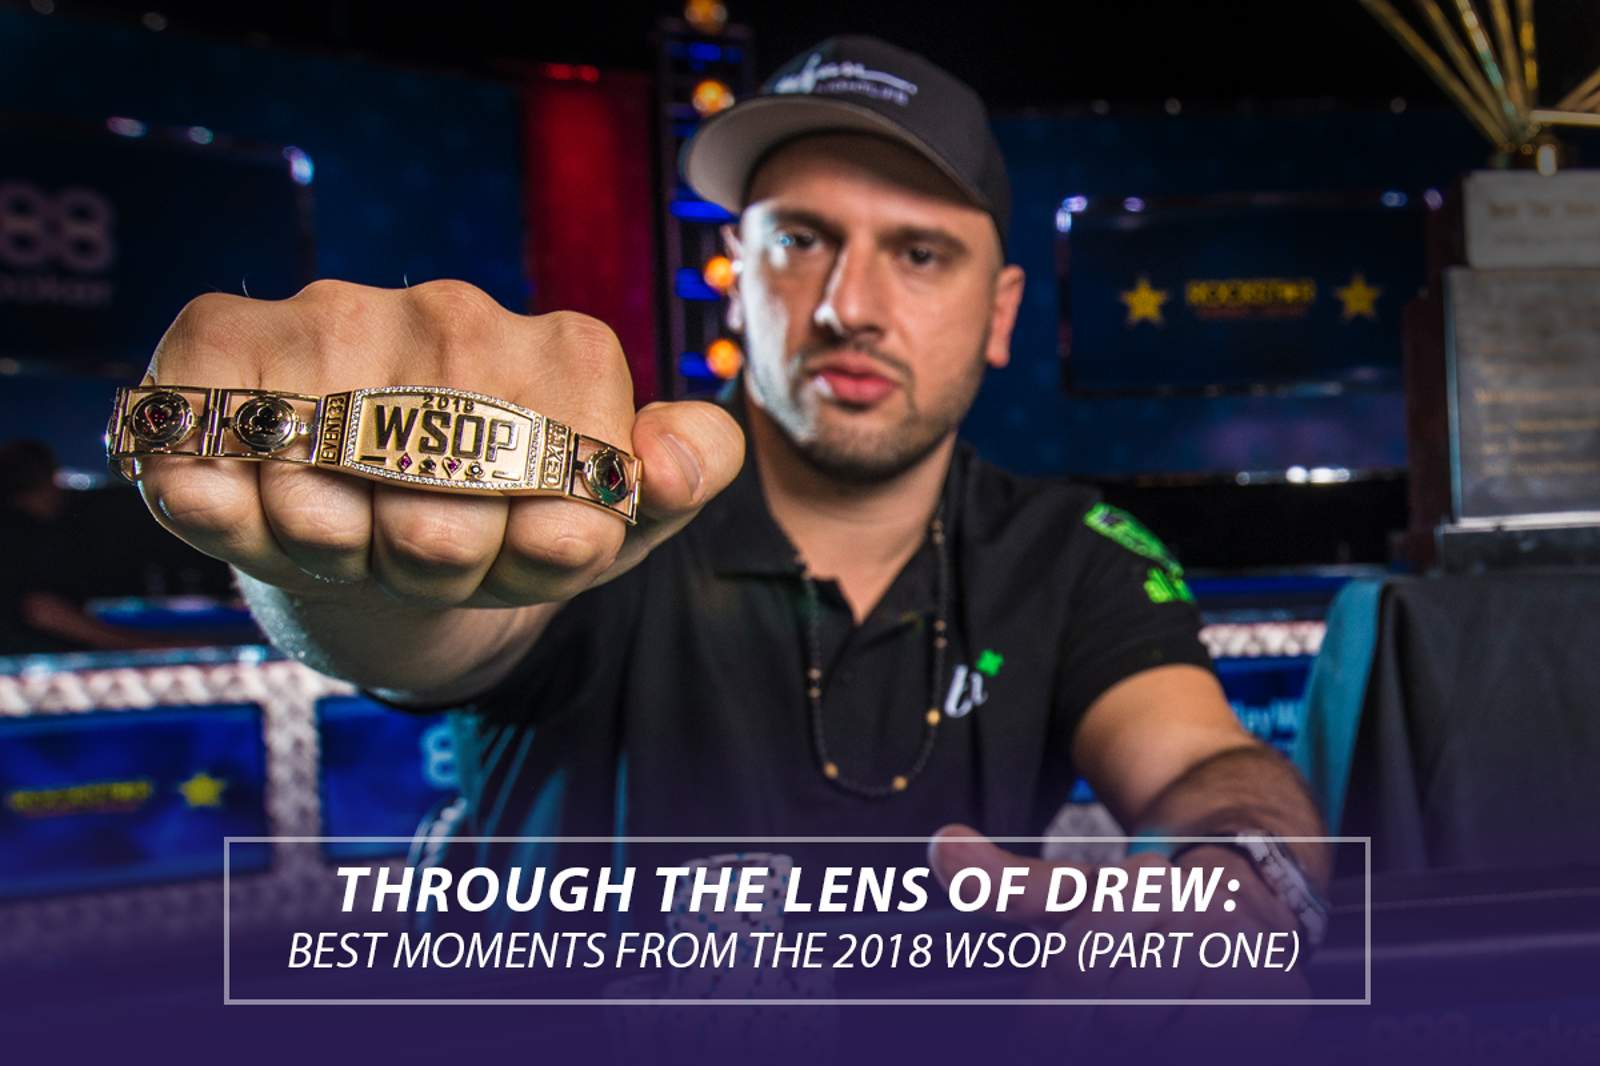 Through the Lens: Best Moments From the 2018 WSOP (Part One)